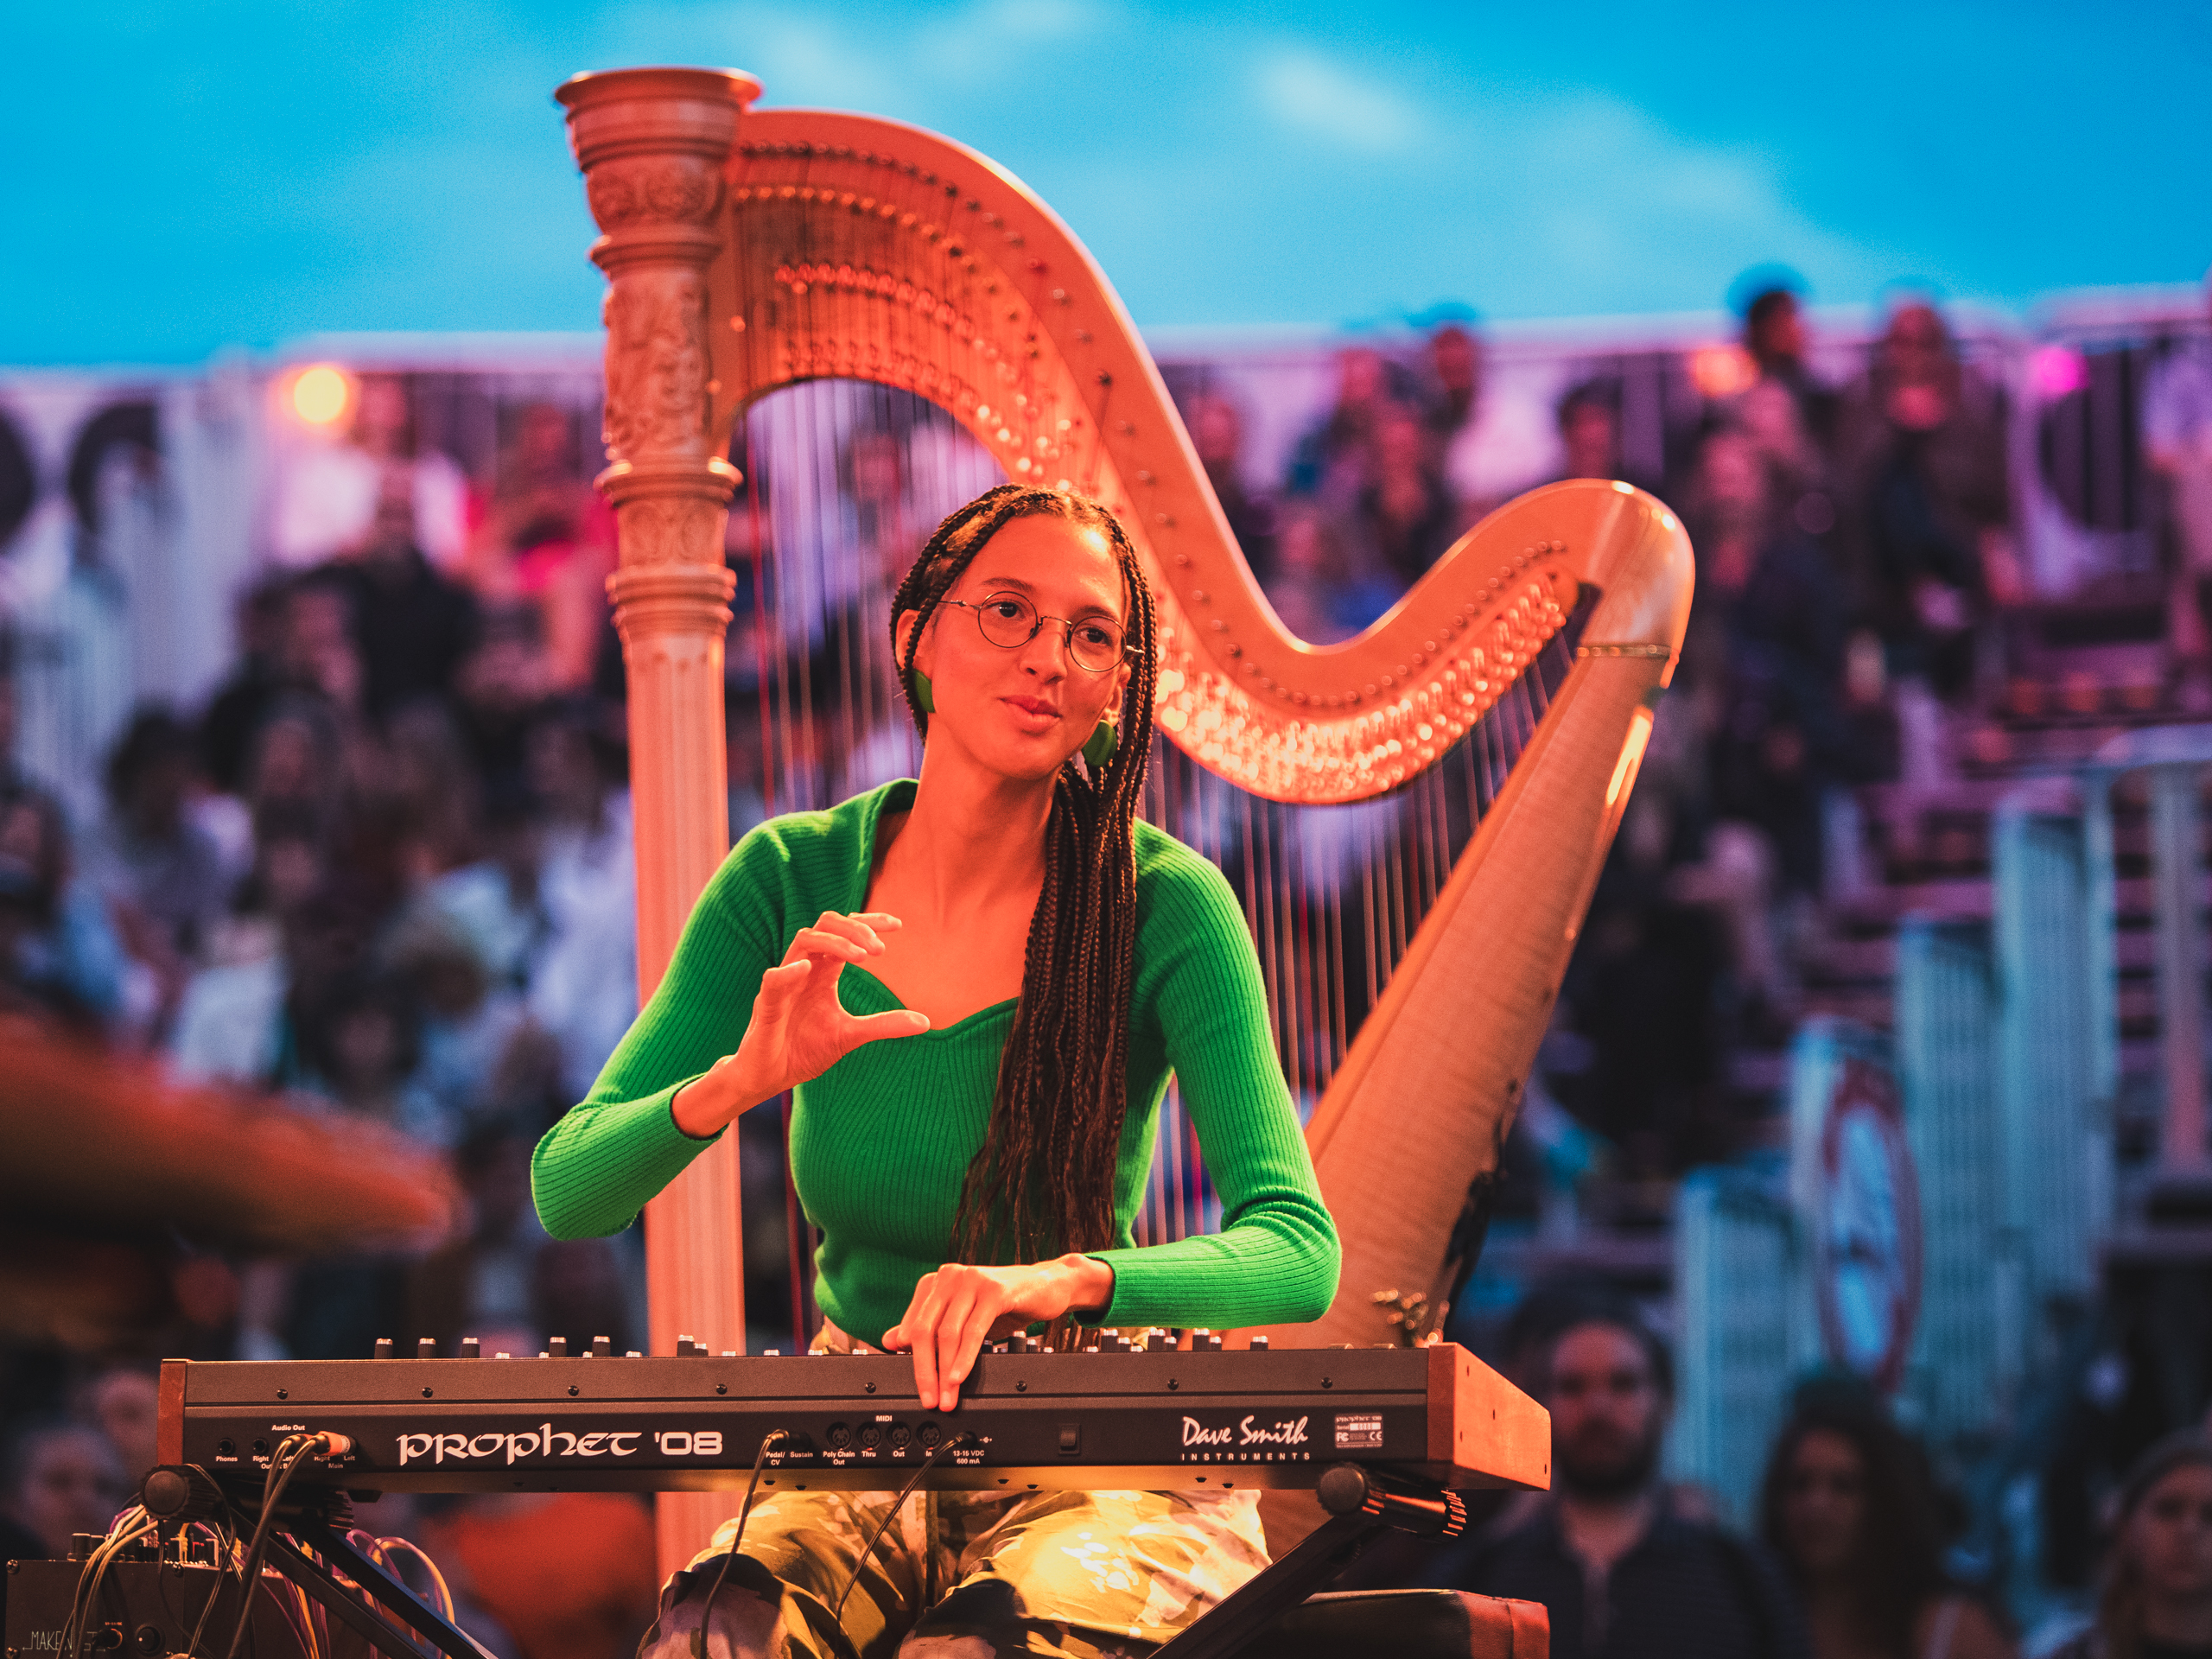 Nala Sinephro in performs at a piano in front of a giant harp